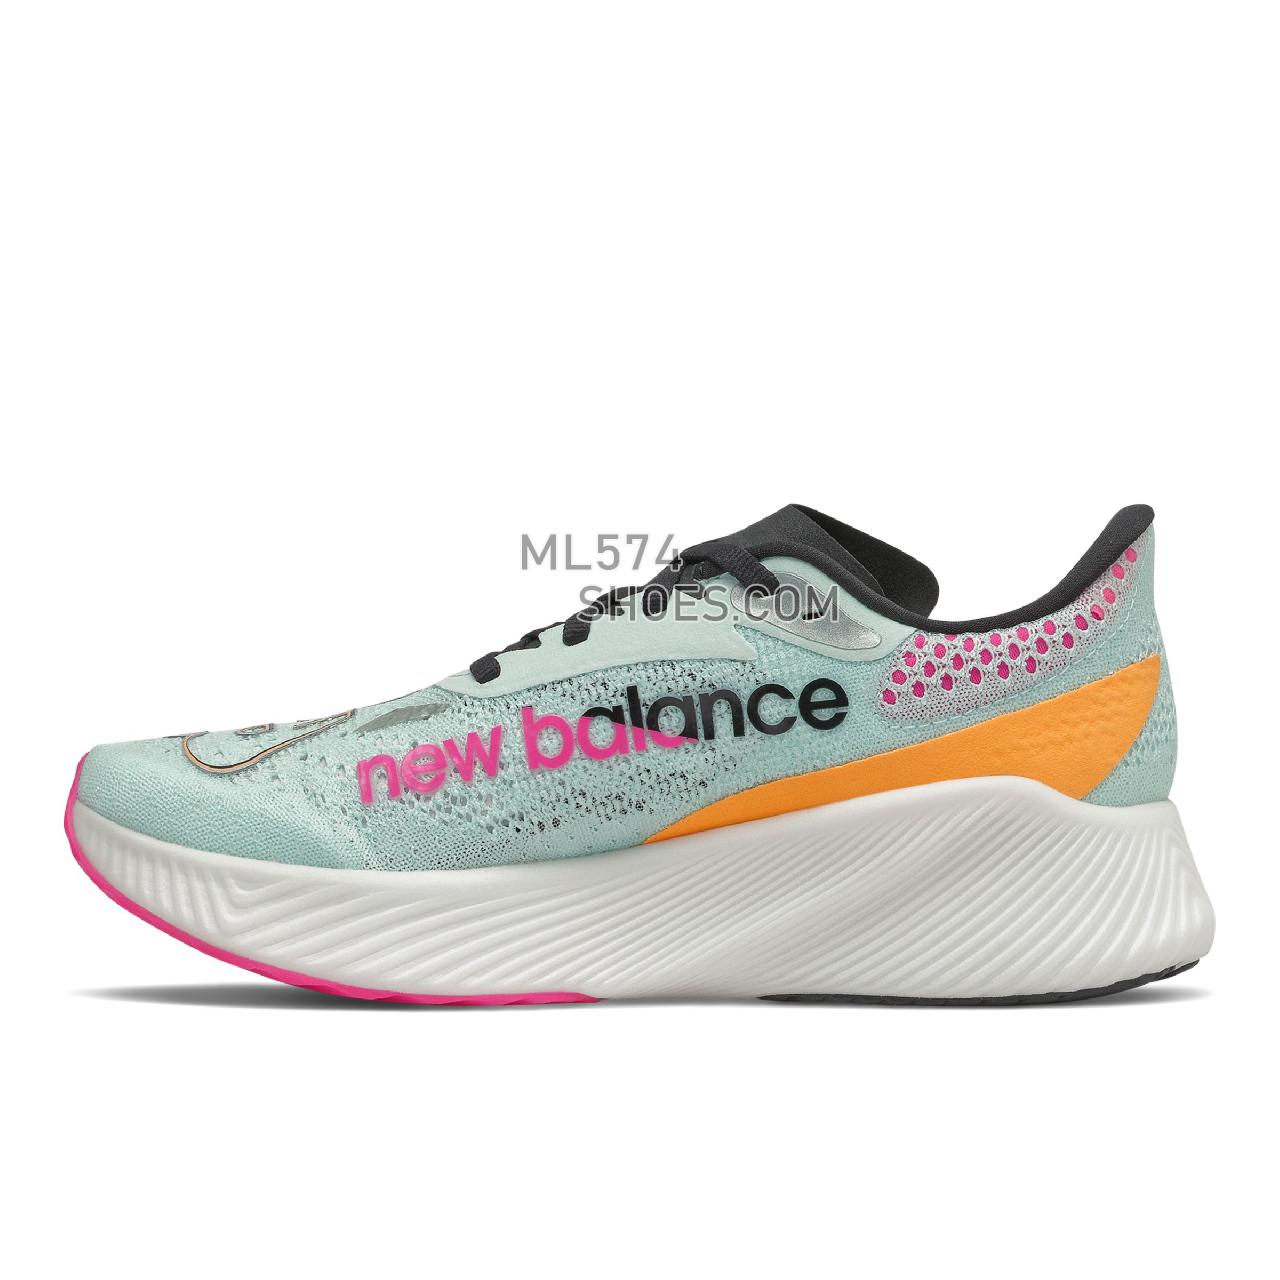 New Balance FuelCell RC Elite v2 - Women's Fuelcell Sleek And LightWeight - Pale Blue Chill with Deep Violet - WRCELSV2